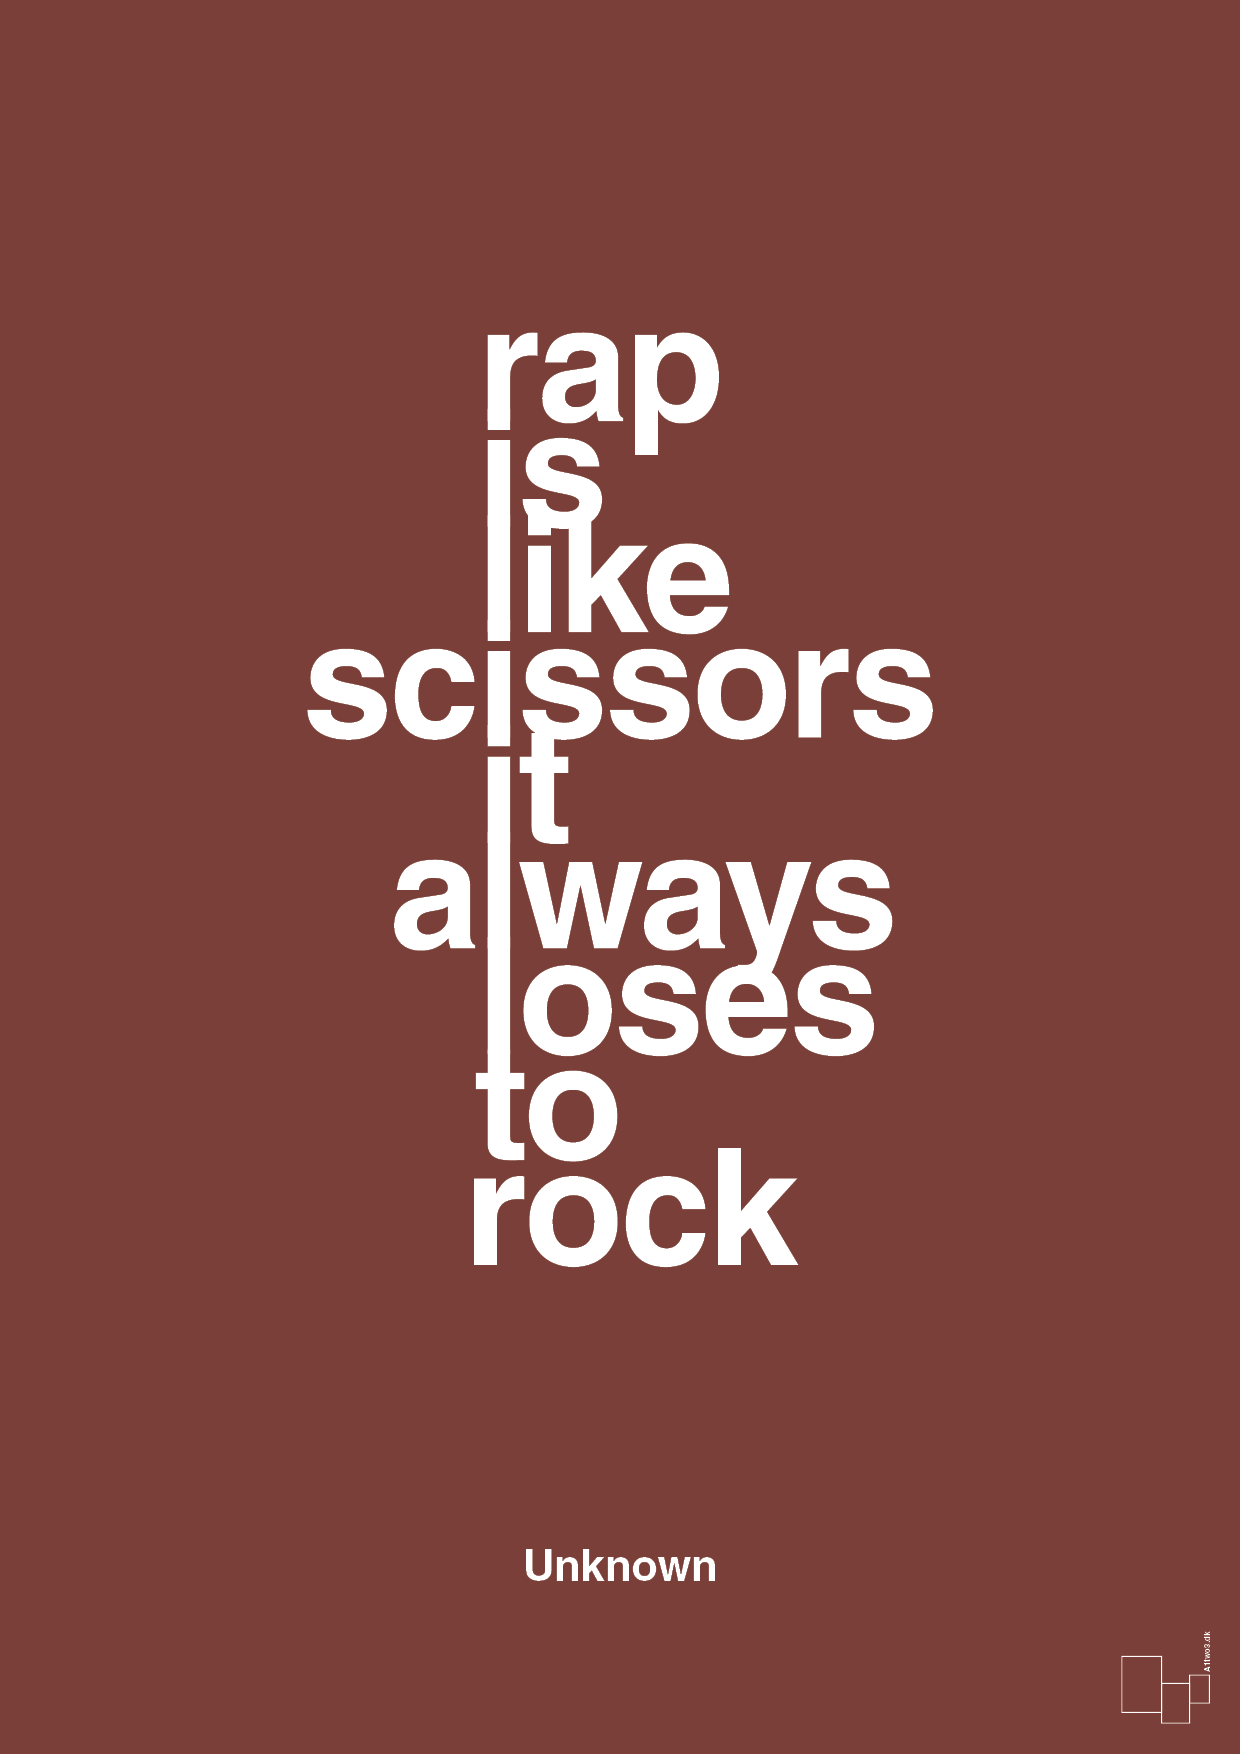 rap is like scissors it always loses to rock - Plakat med Citater i Red Pepper